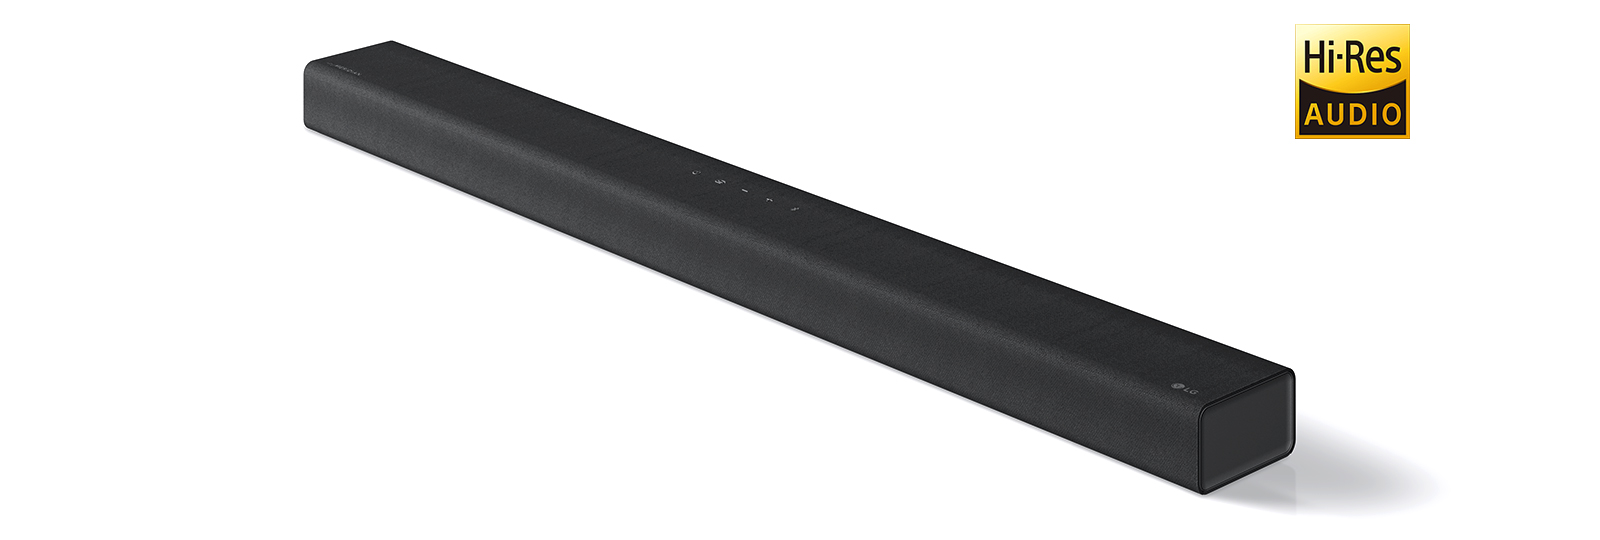 Full image of LG Sound bar right side with LG logo on the bottom right corner of a product.